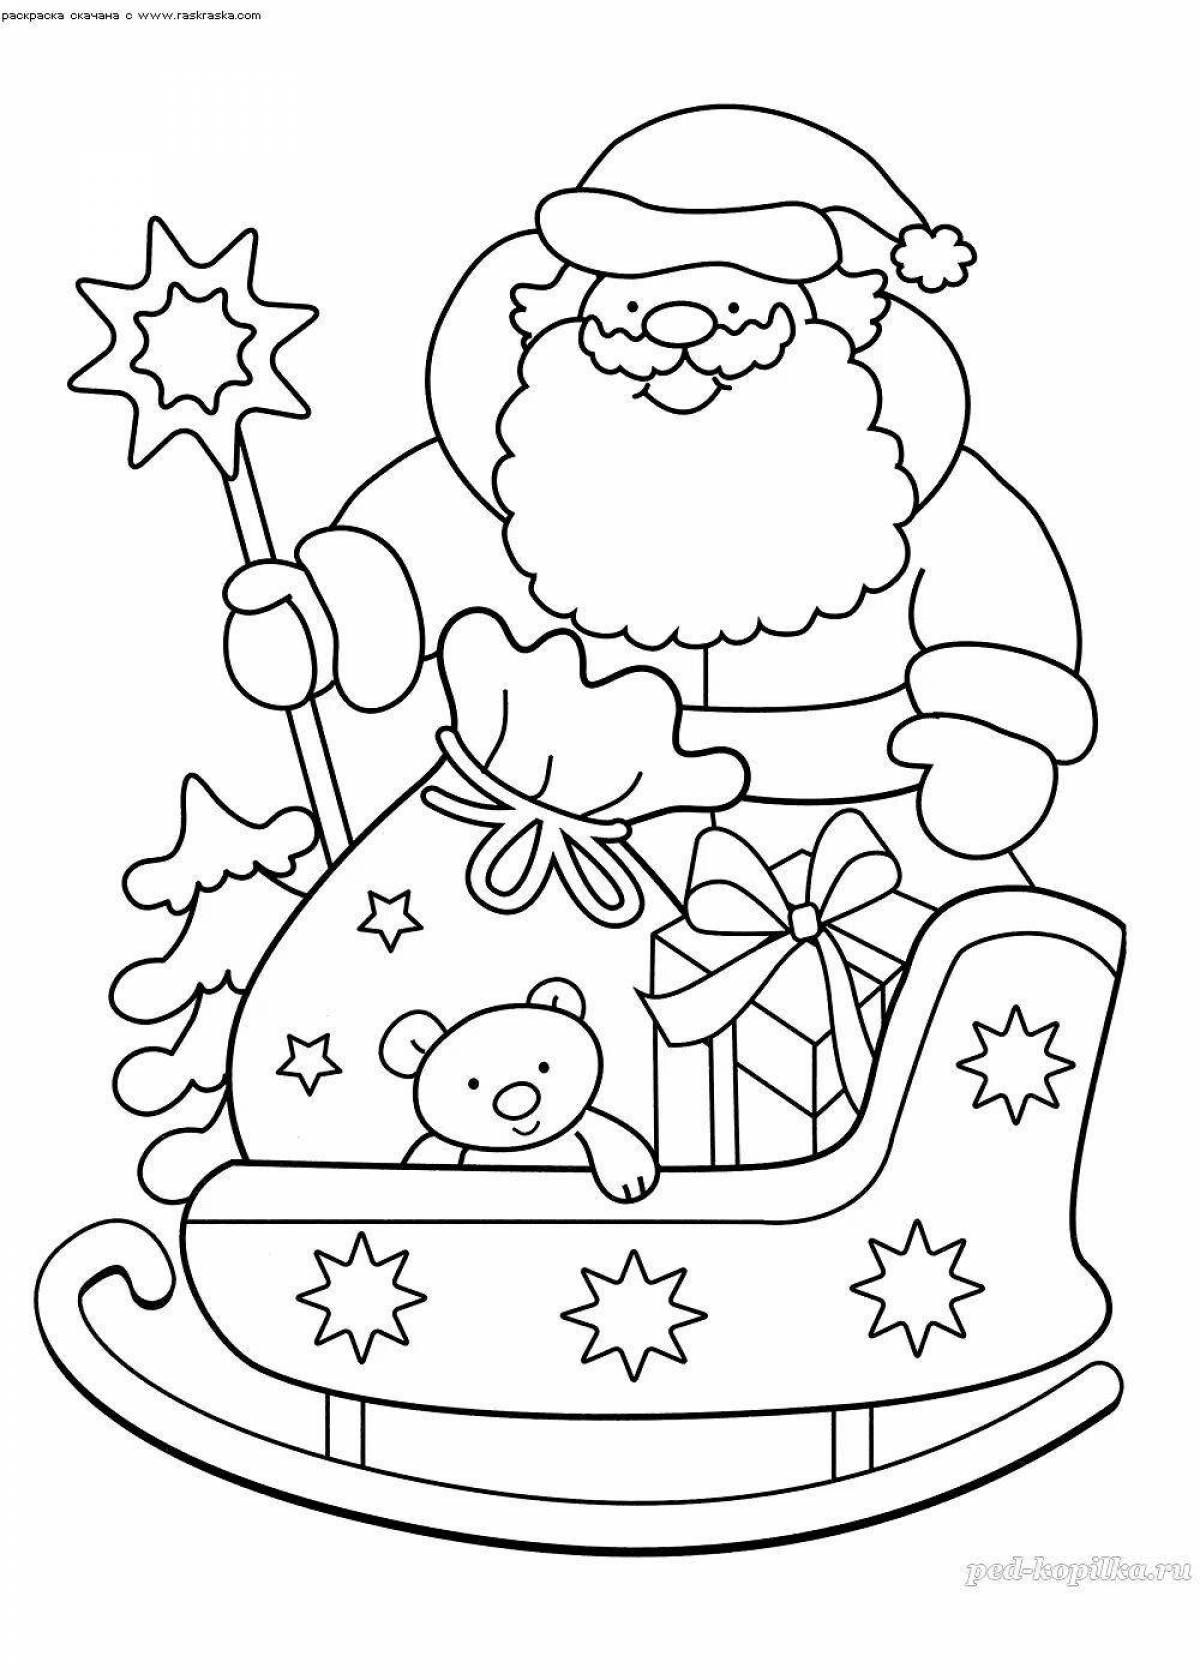 Coloring card with cute santa claus